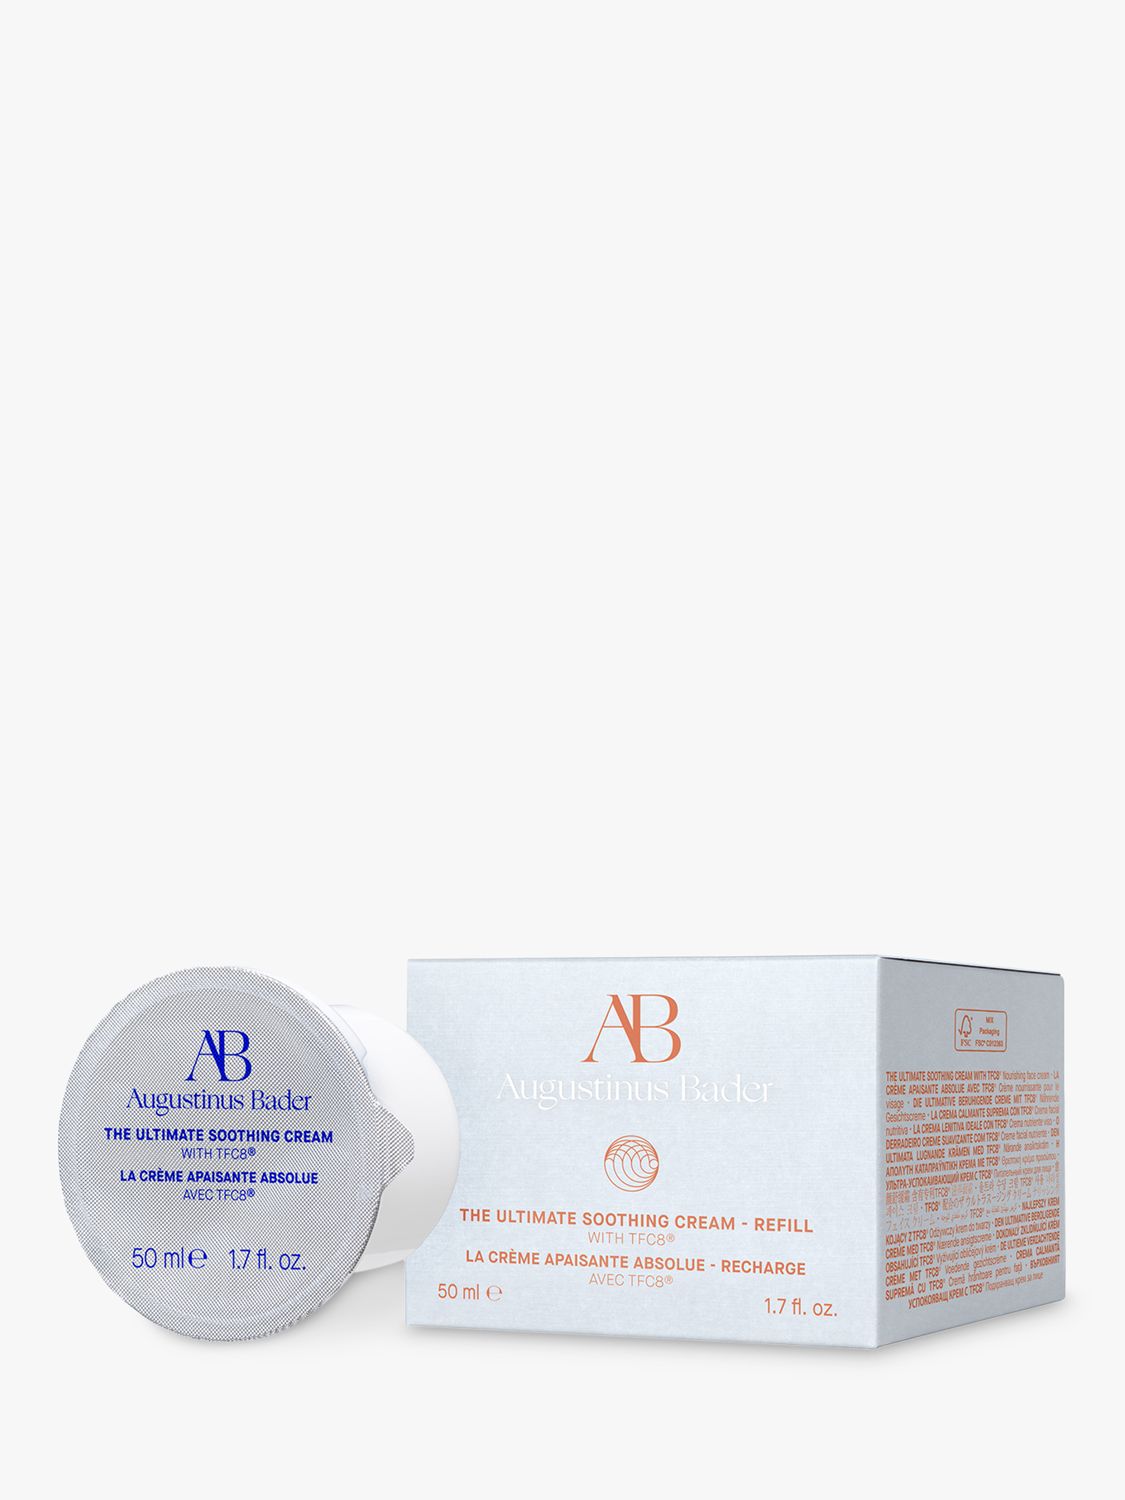 Augustinus Bader The Ultimate Soothing Cream, Refill, 50ml 1